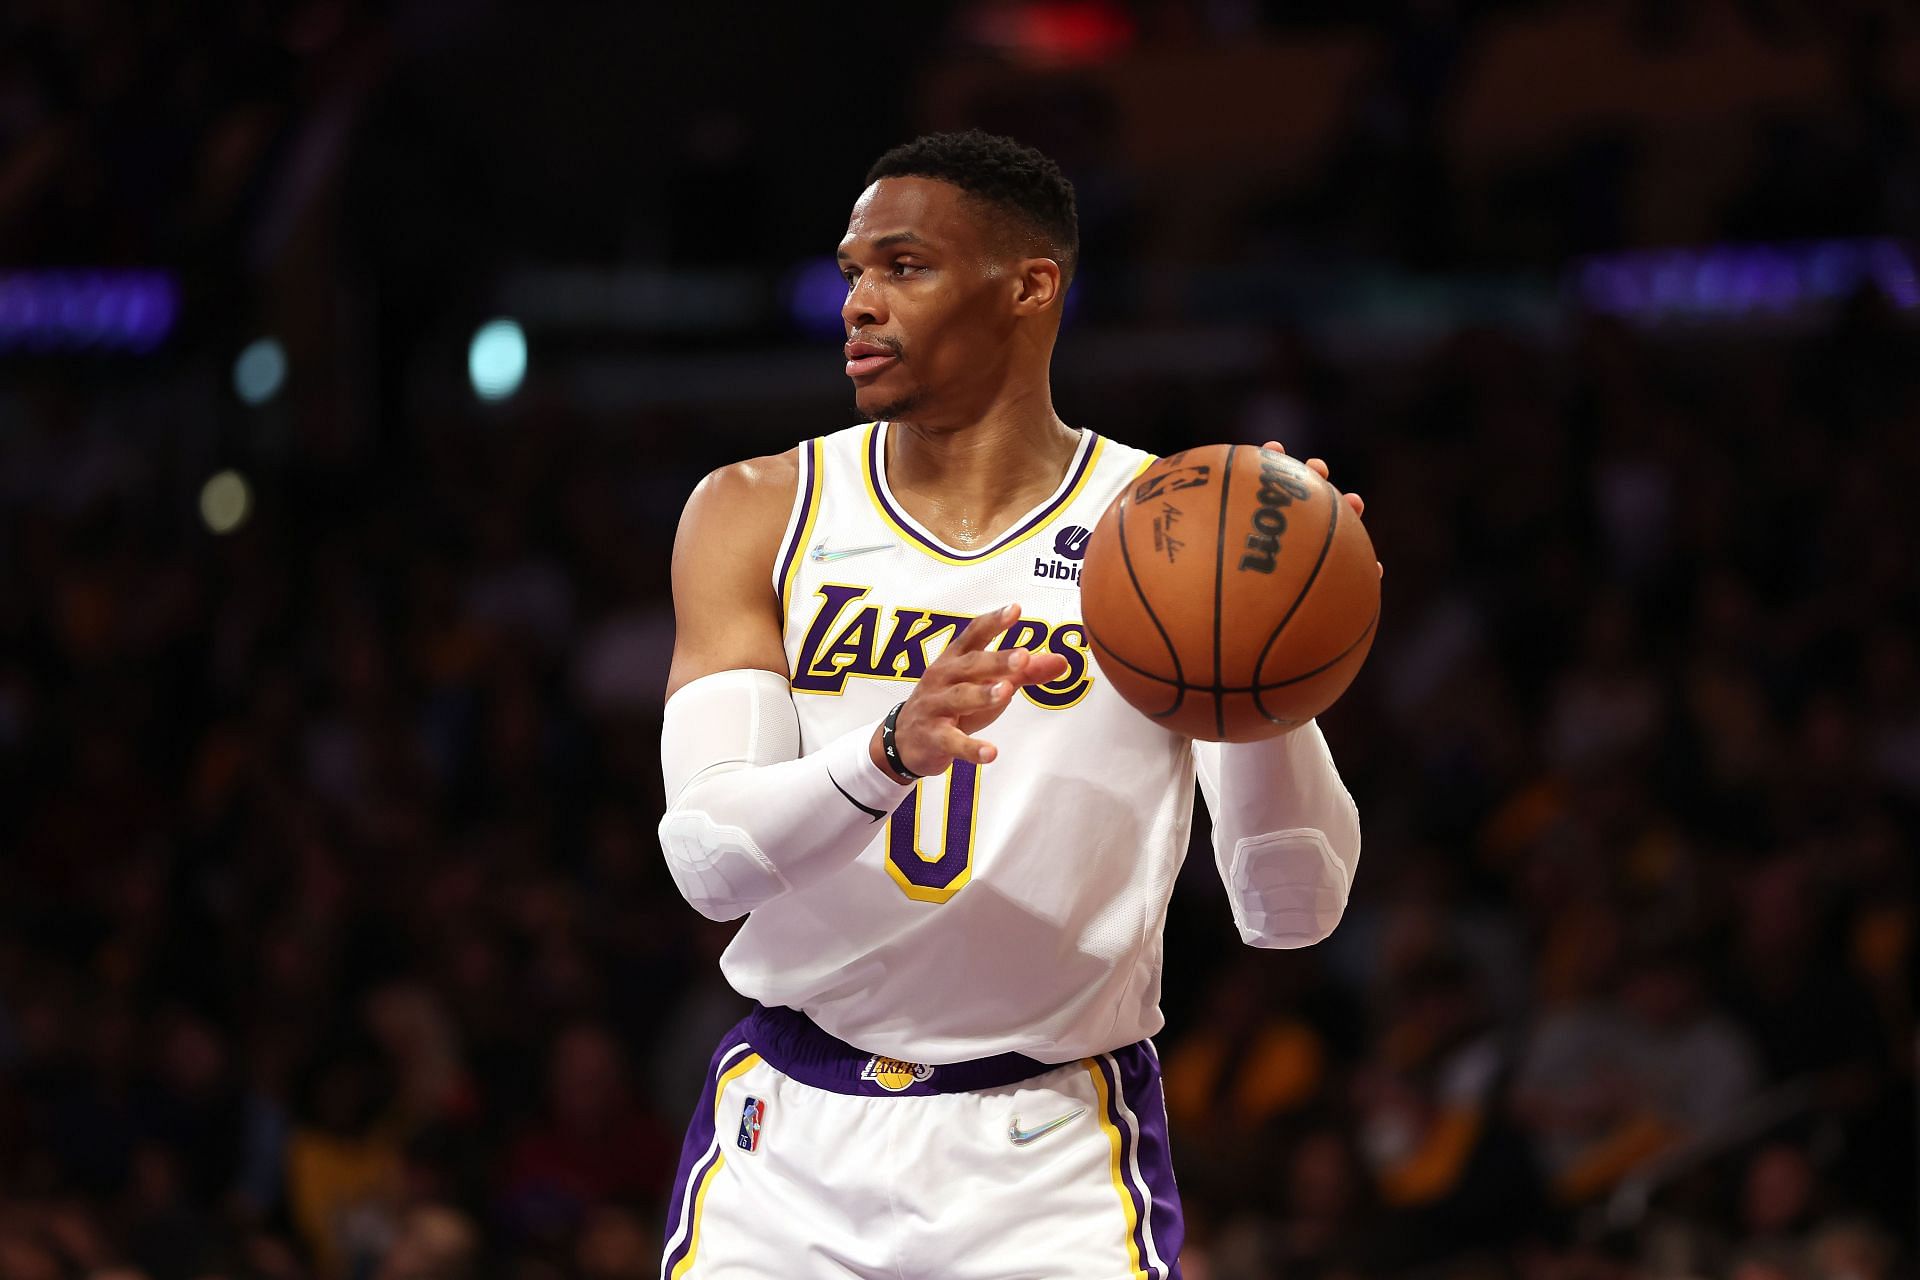 Russell Westbrook of the LA Lakers looks plays against the Denver Nuggets on April 3 in Los Angeles, California.